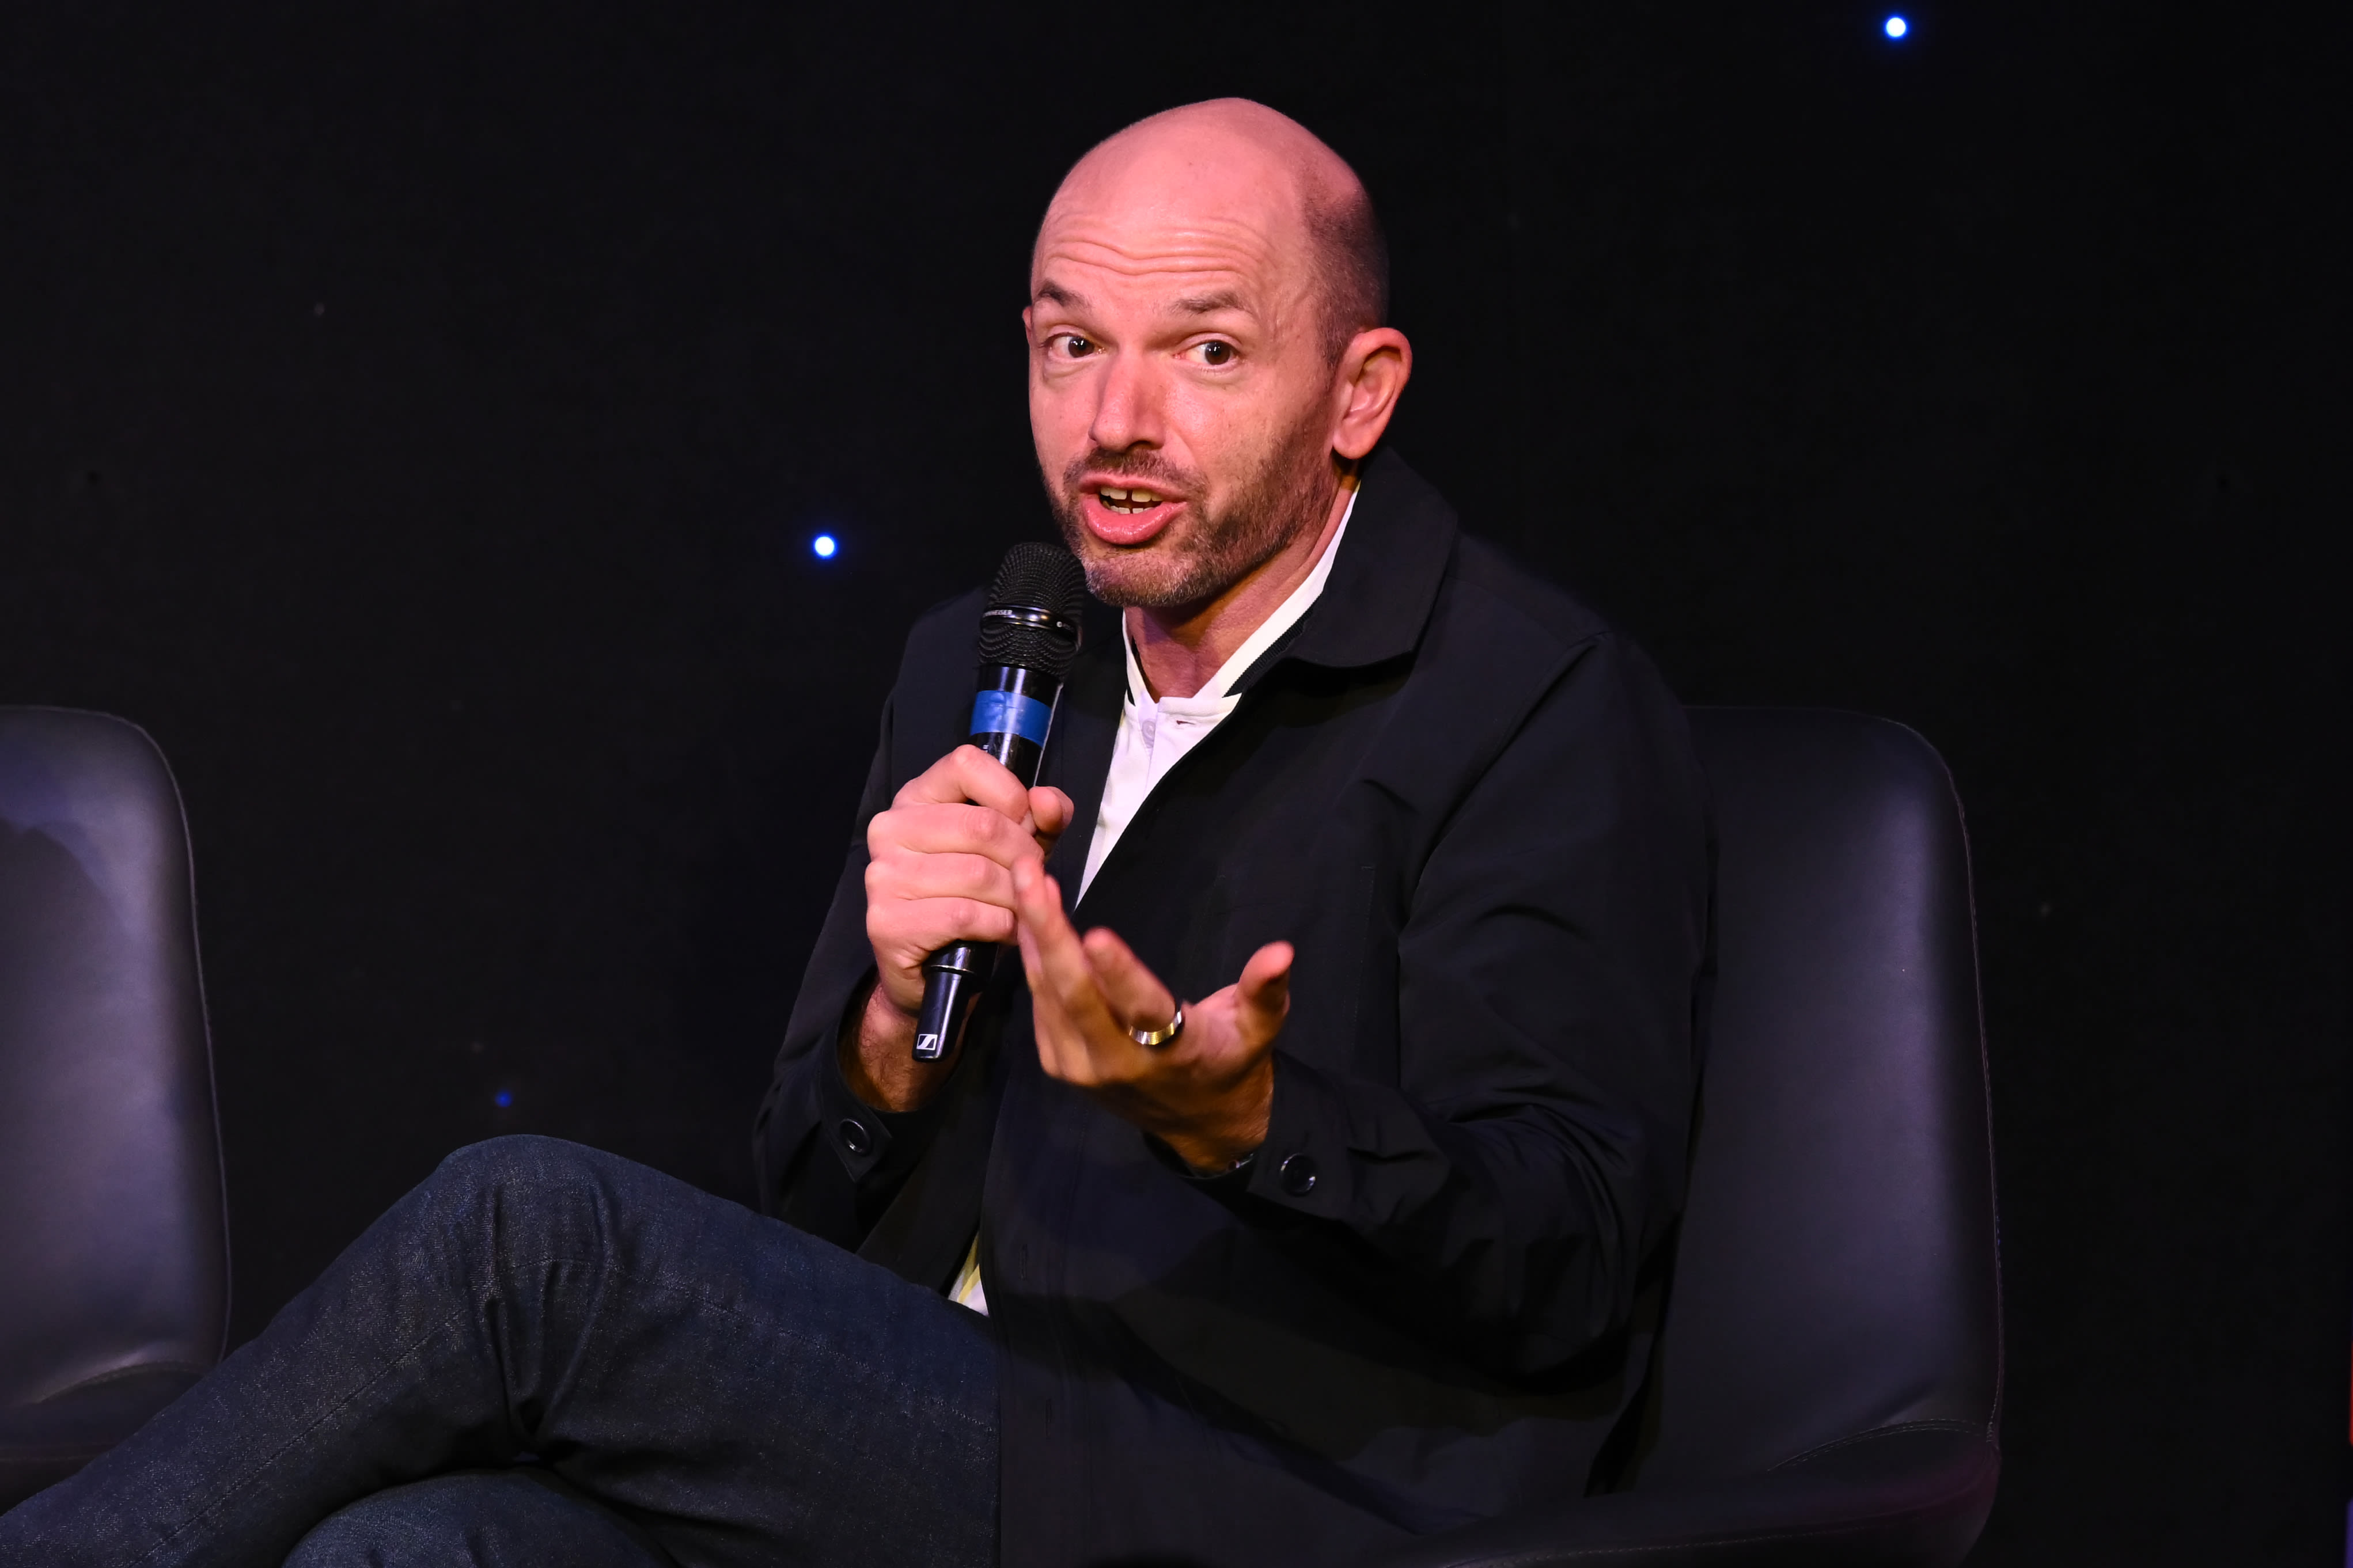 Comedian Paul Scheer Hadn’t Realized His Childhood Was Abusive. His New Memoir Examines His Pain With Humor...